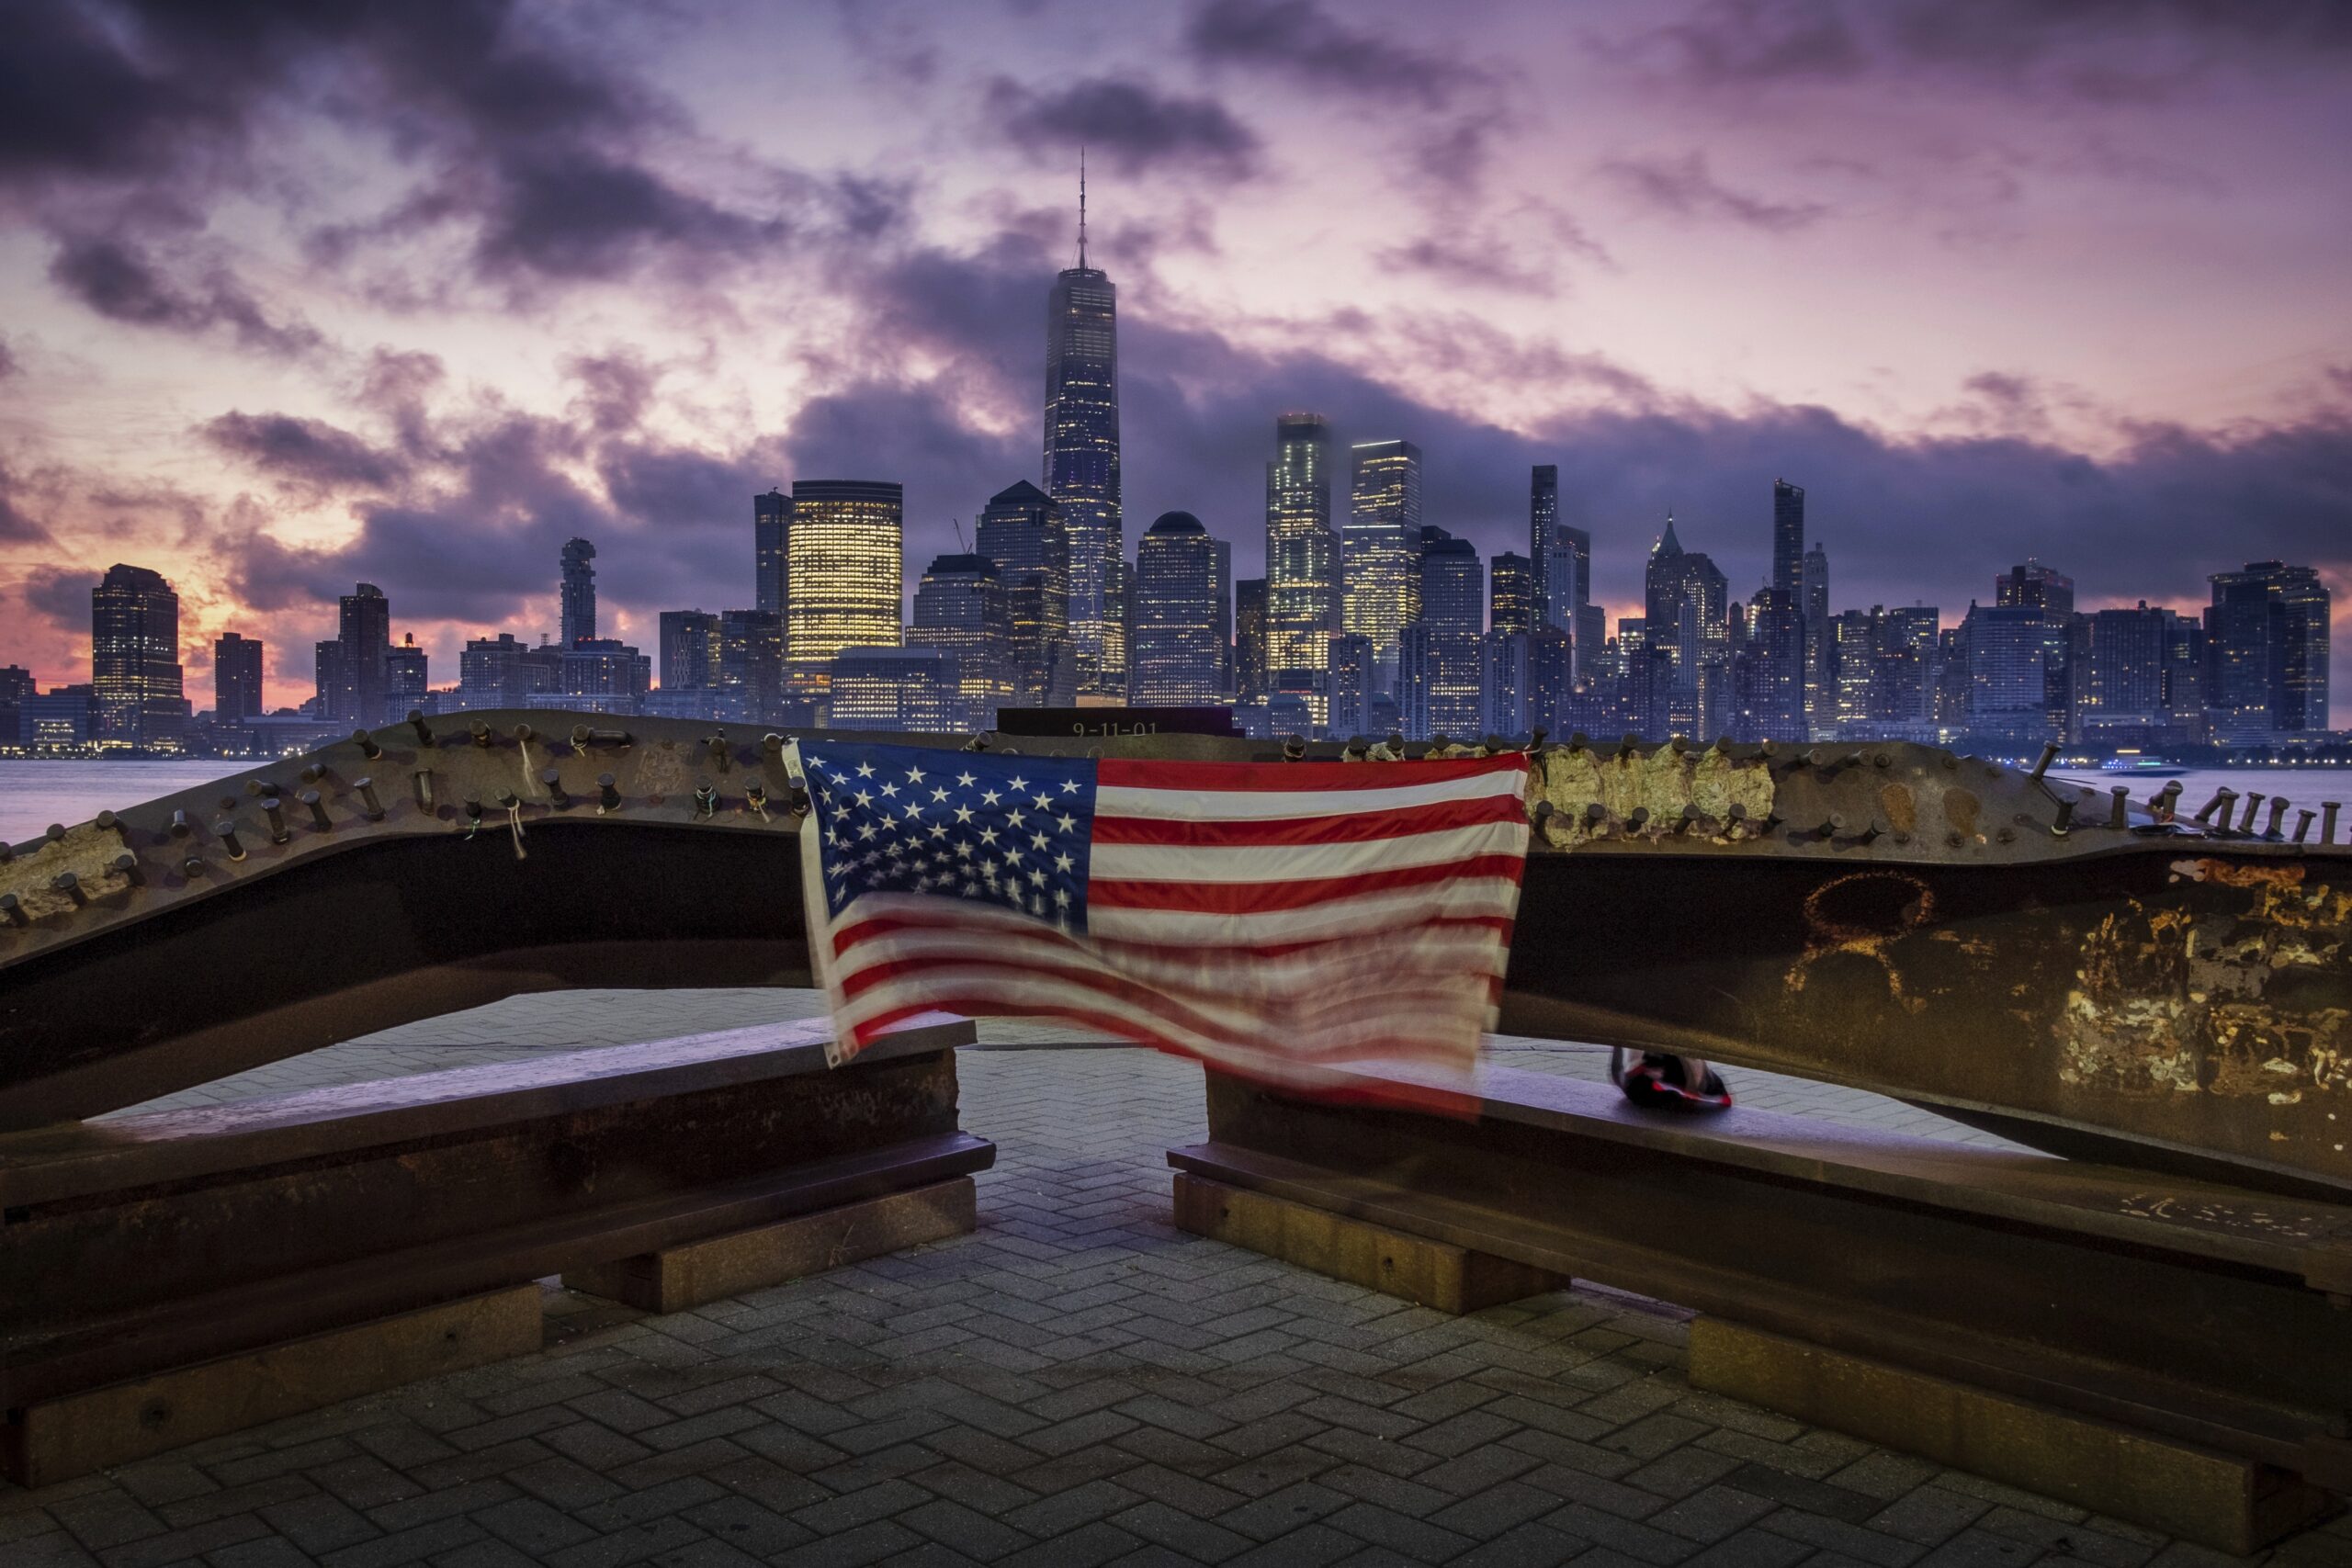 A U.S. flag hanging from a steel girder, damaged in the Sept. 11, 2001 attacks on the World Trade Center